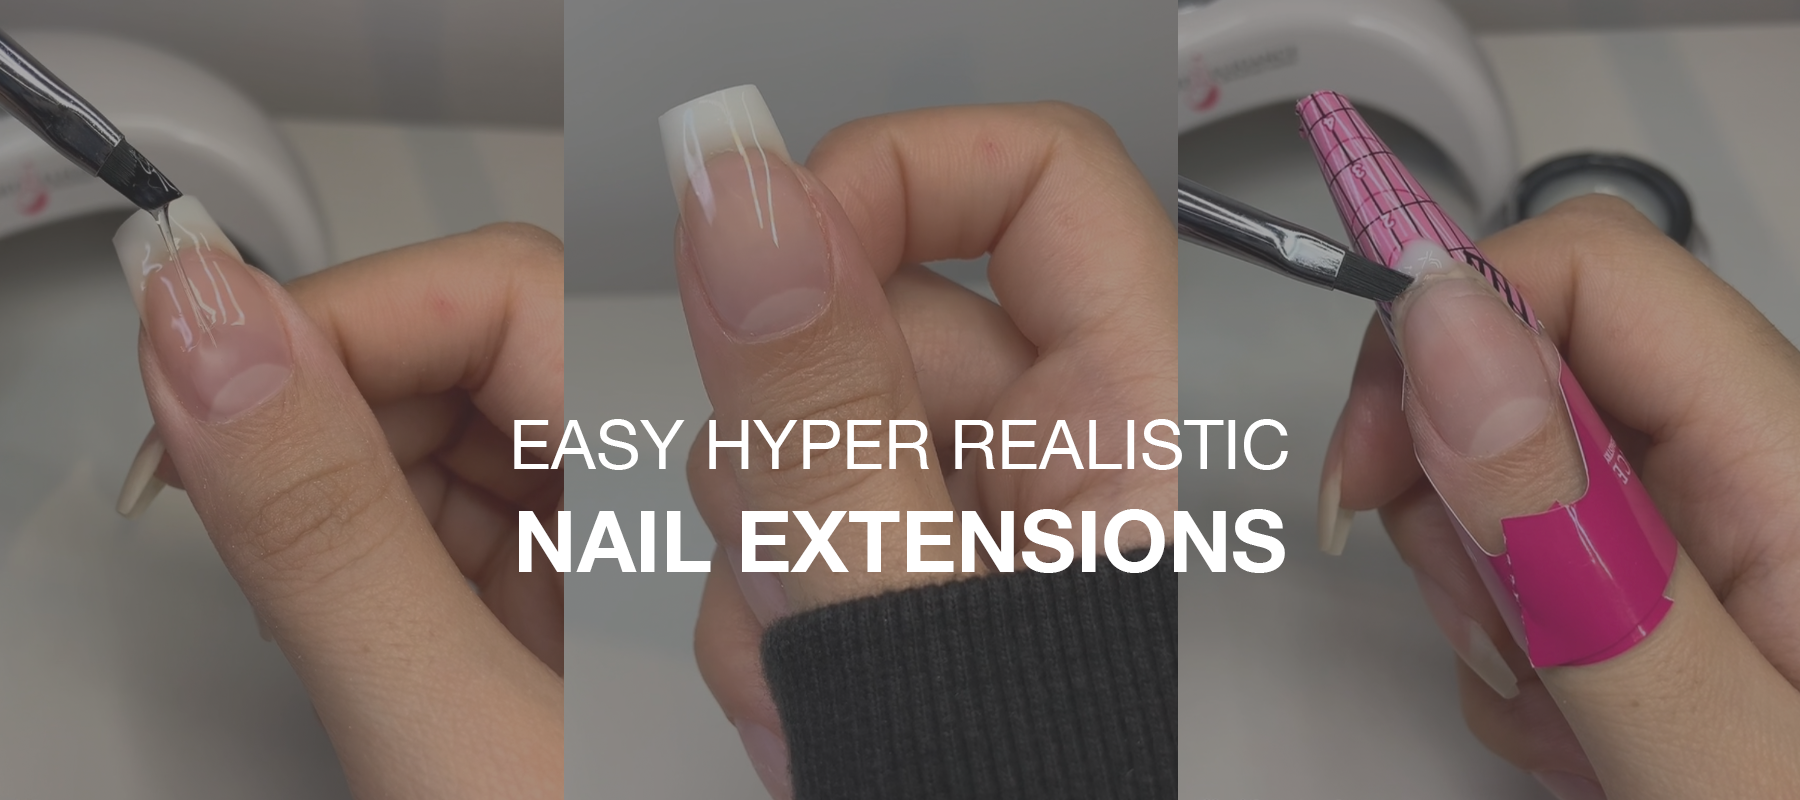 Create Realistic, Natural Looking Extensions with Lexy Line Builder Gels